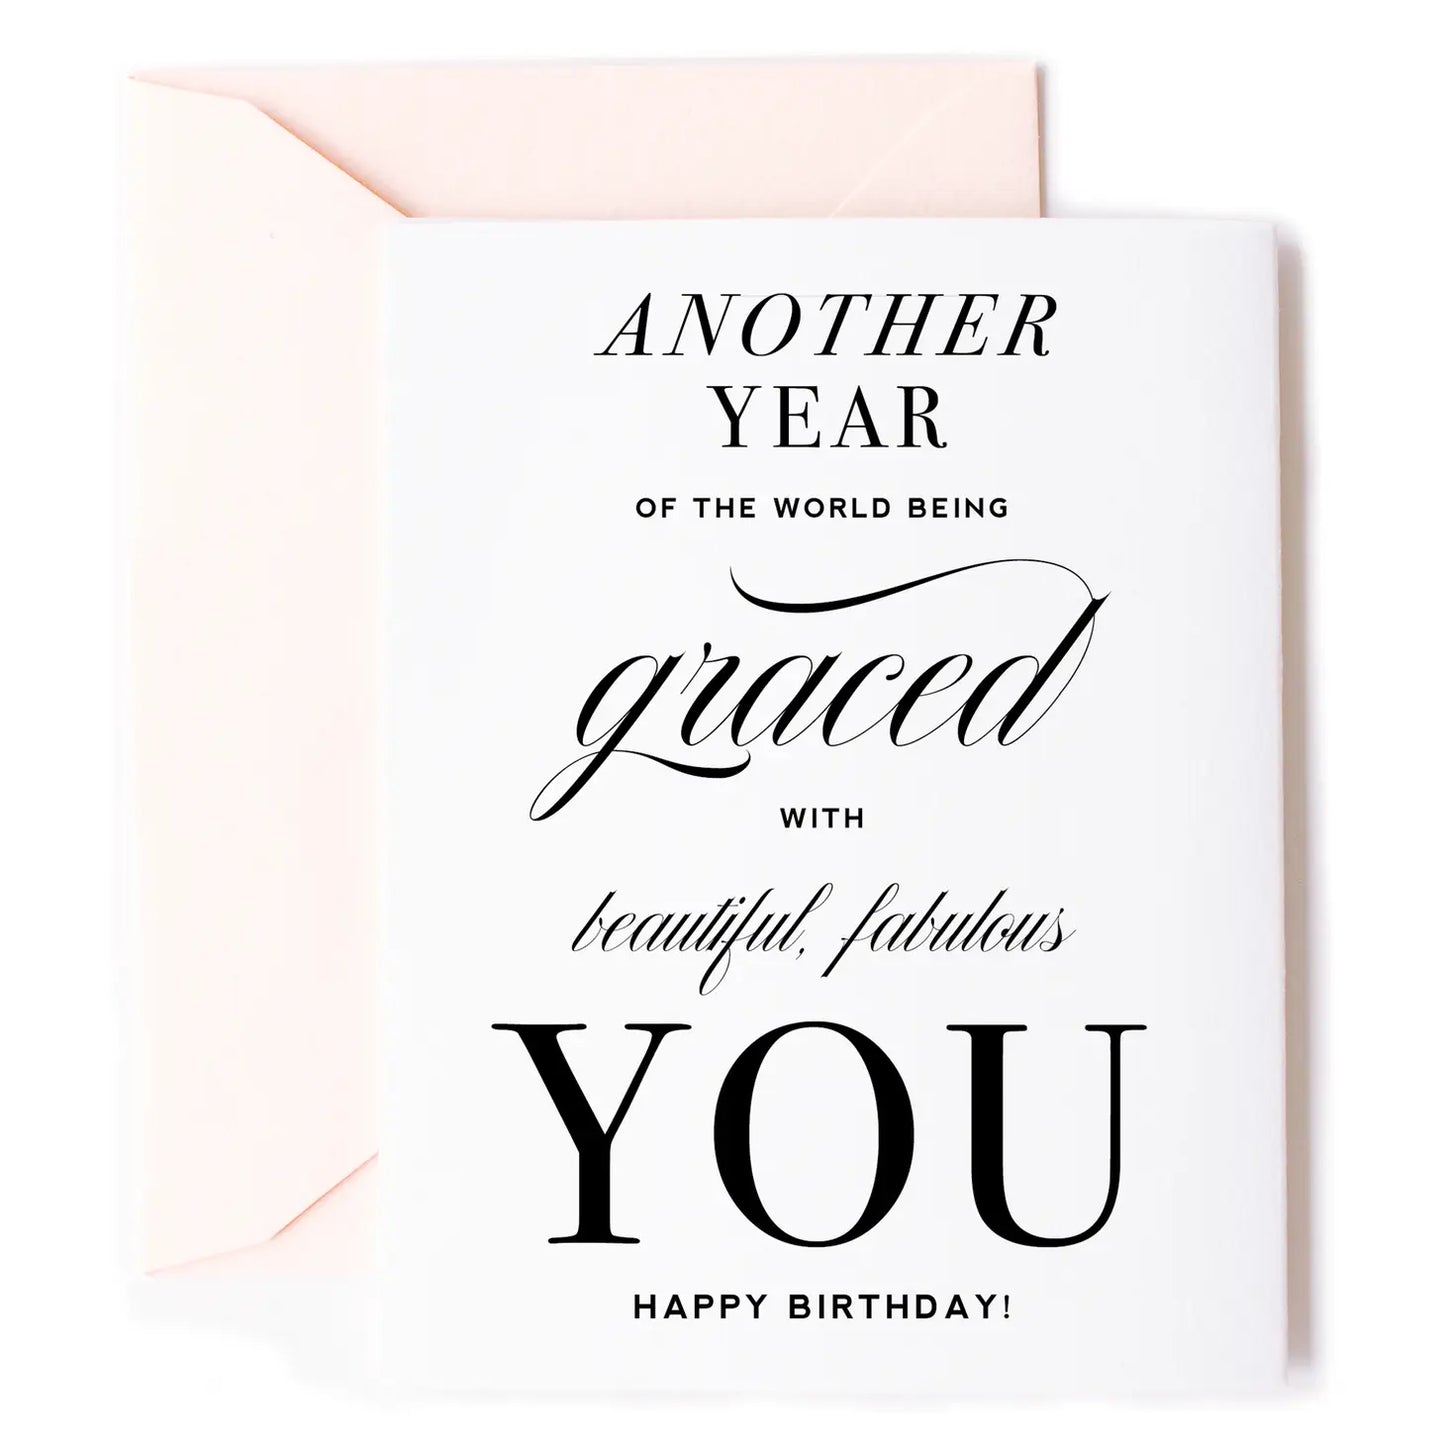 Load image into Gallery viewer, Another Year Graced, Inspirational Birthday Card
